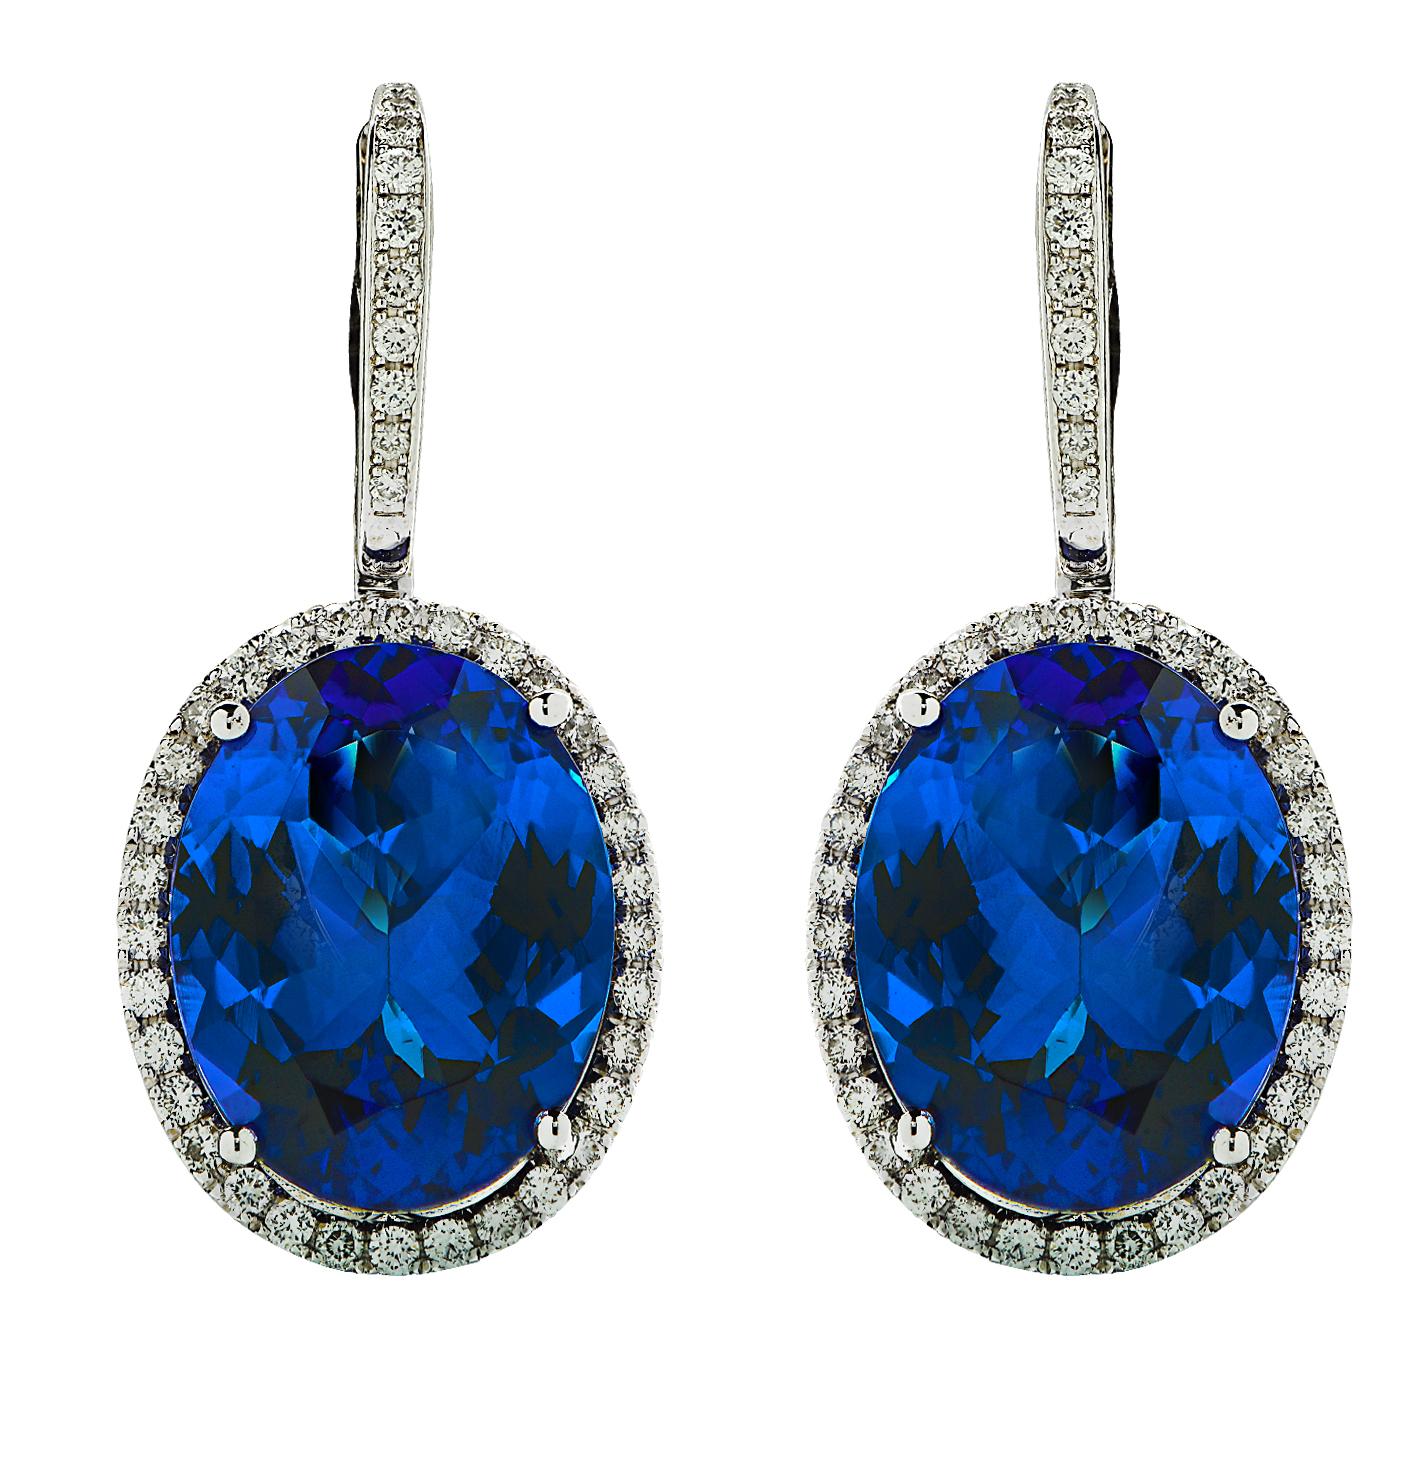 Dazzling Tanzanite and Diamond dangle earrings crafted in 18 karat white gold, showcasing 2 beautiful tanzanite gemstones weighing approximately 22.16 carats total, surrounded by 84 round brilliant cut diamonds weighing approximately .95 carats